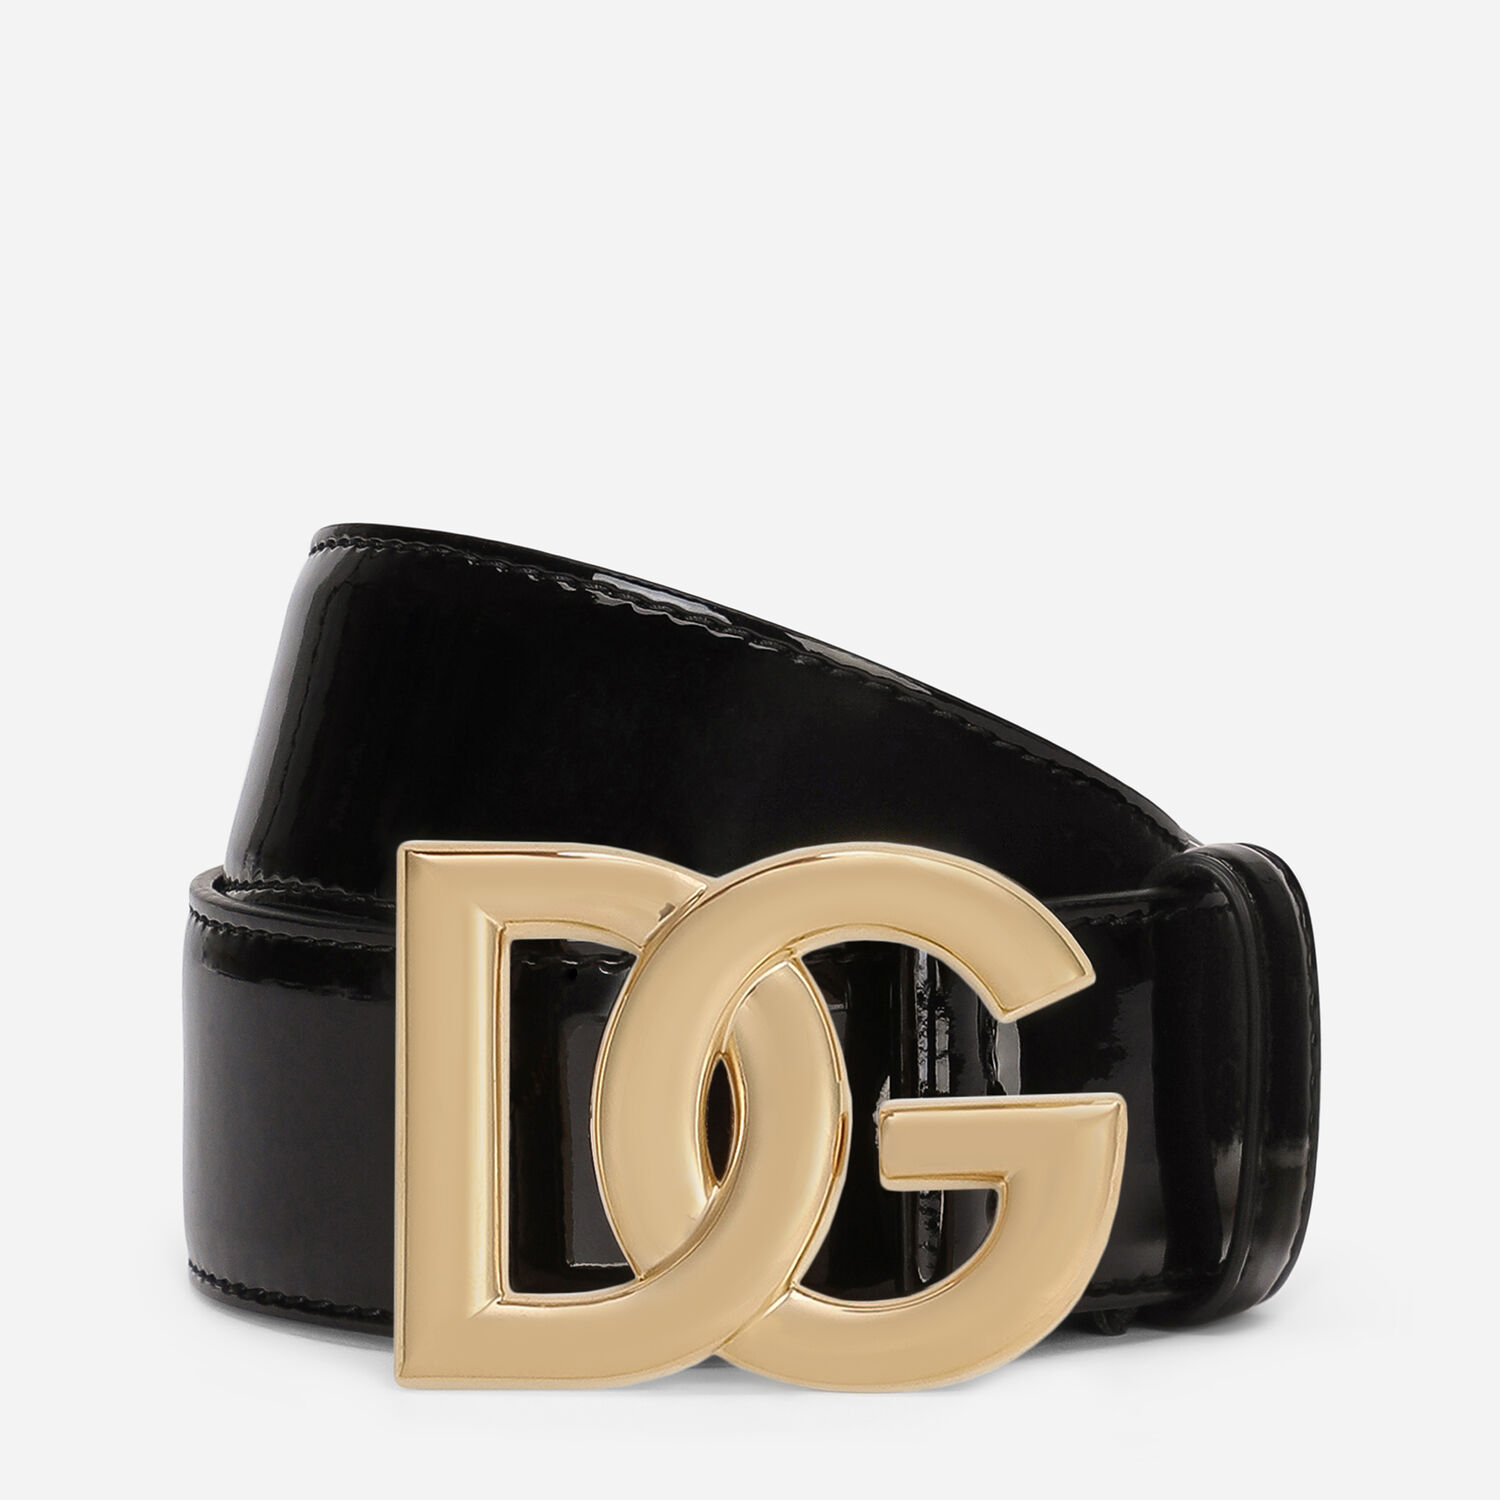 Patent leather | Black in logo Dolce&Gabbana® DG for US belt with